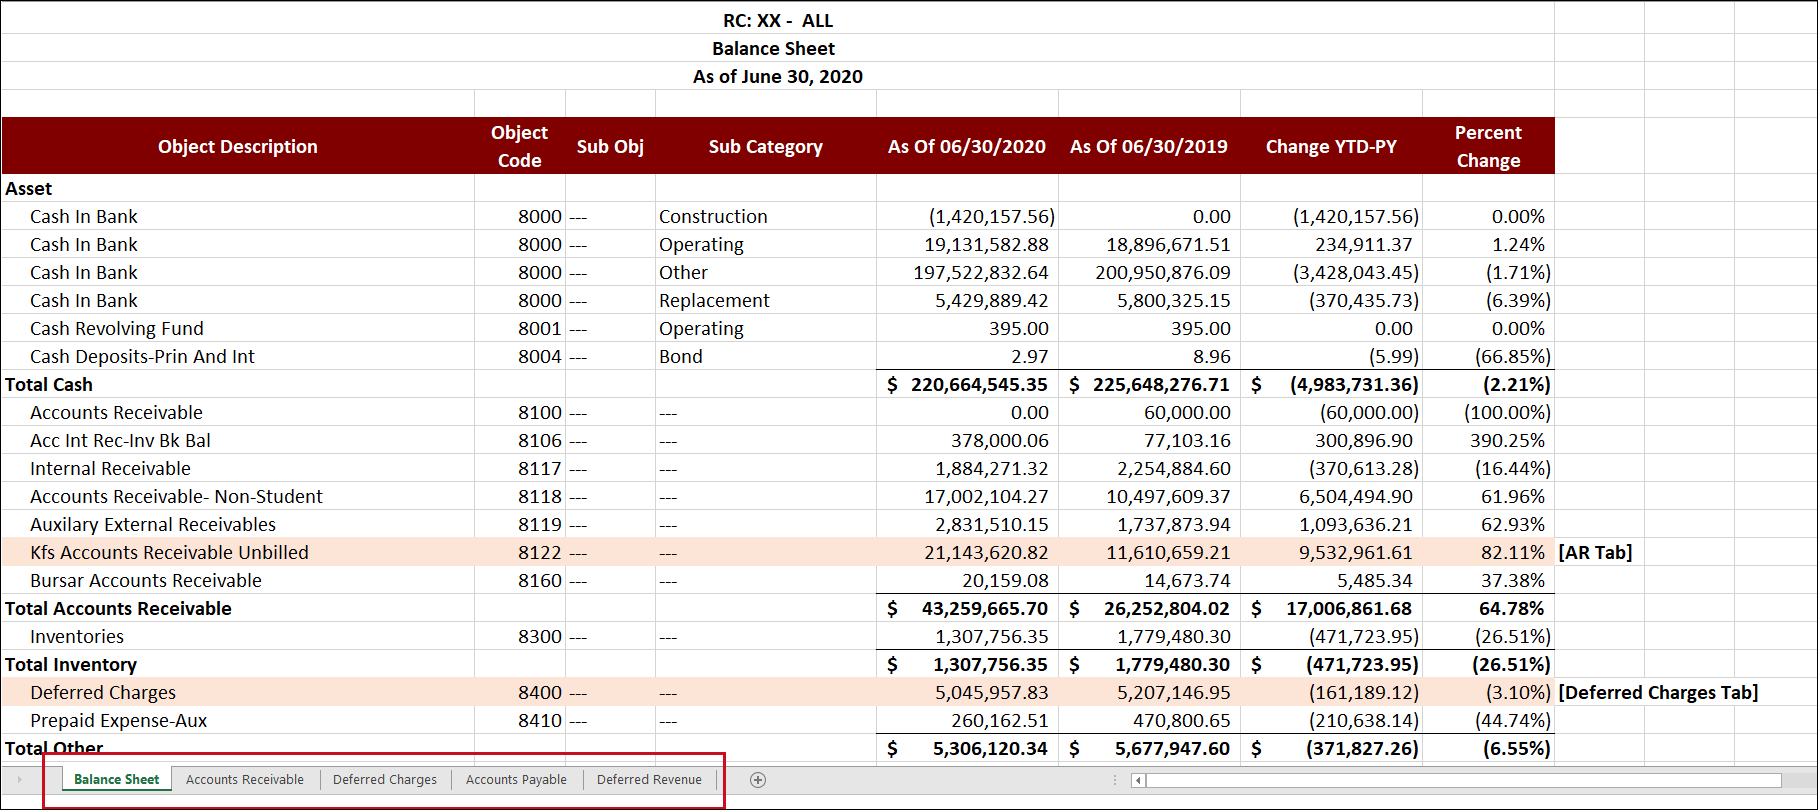 Illustration of a balance sheet and the different supporting tabs for Accounts Receivable, Deferred Changes, Accounts Payable, Deferred Revenue tabs.